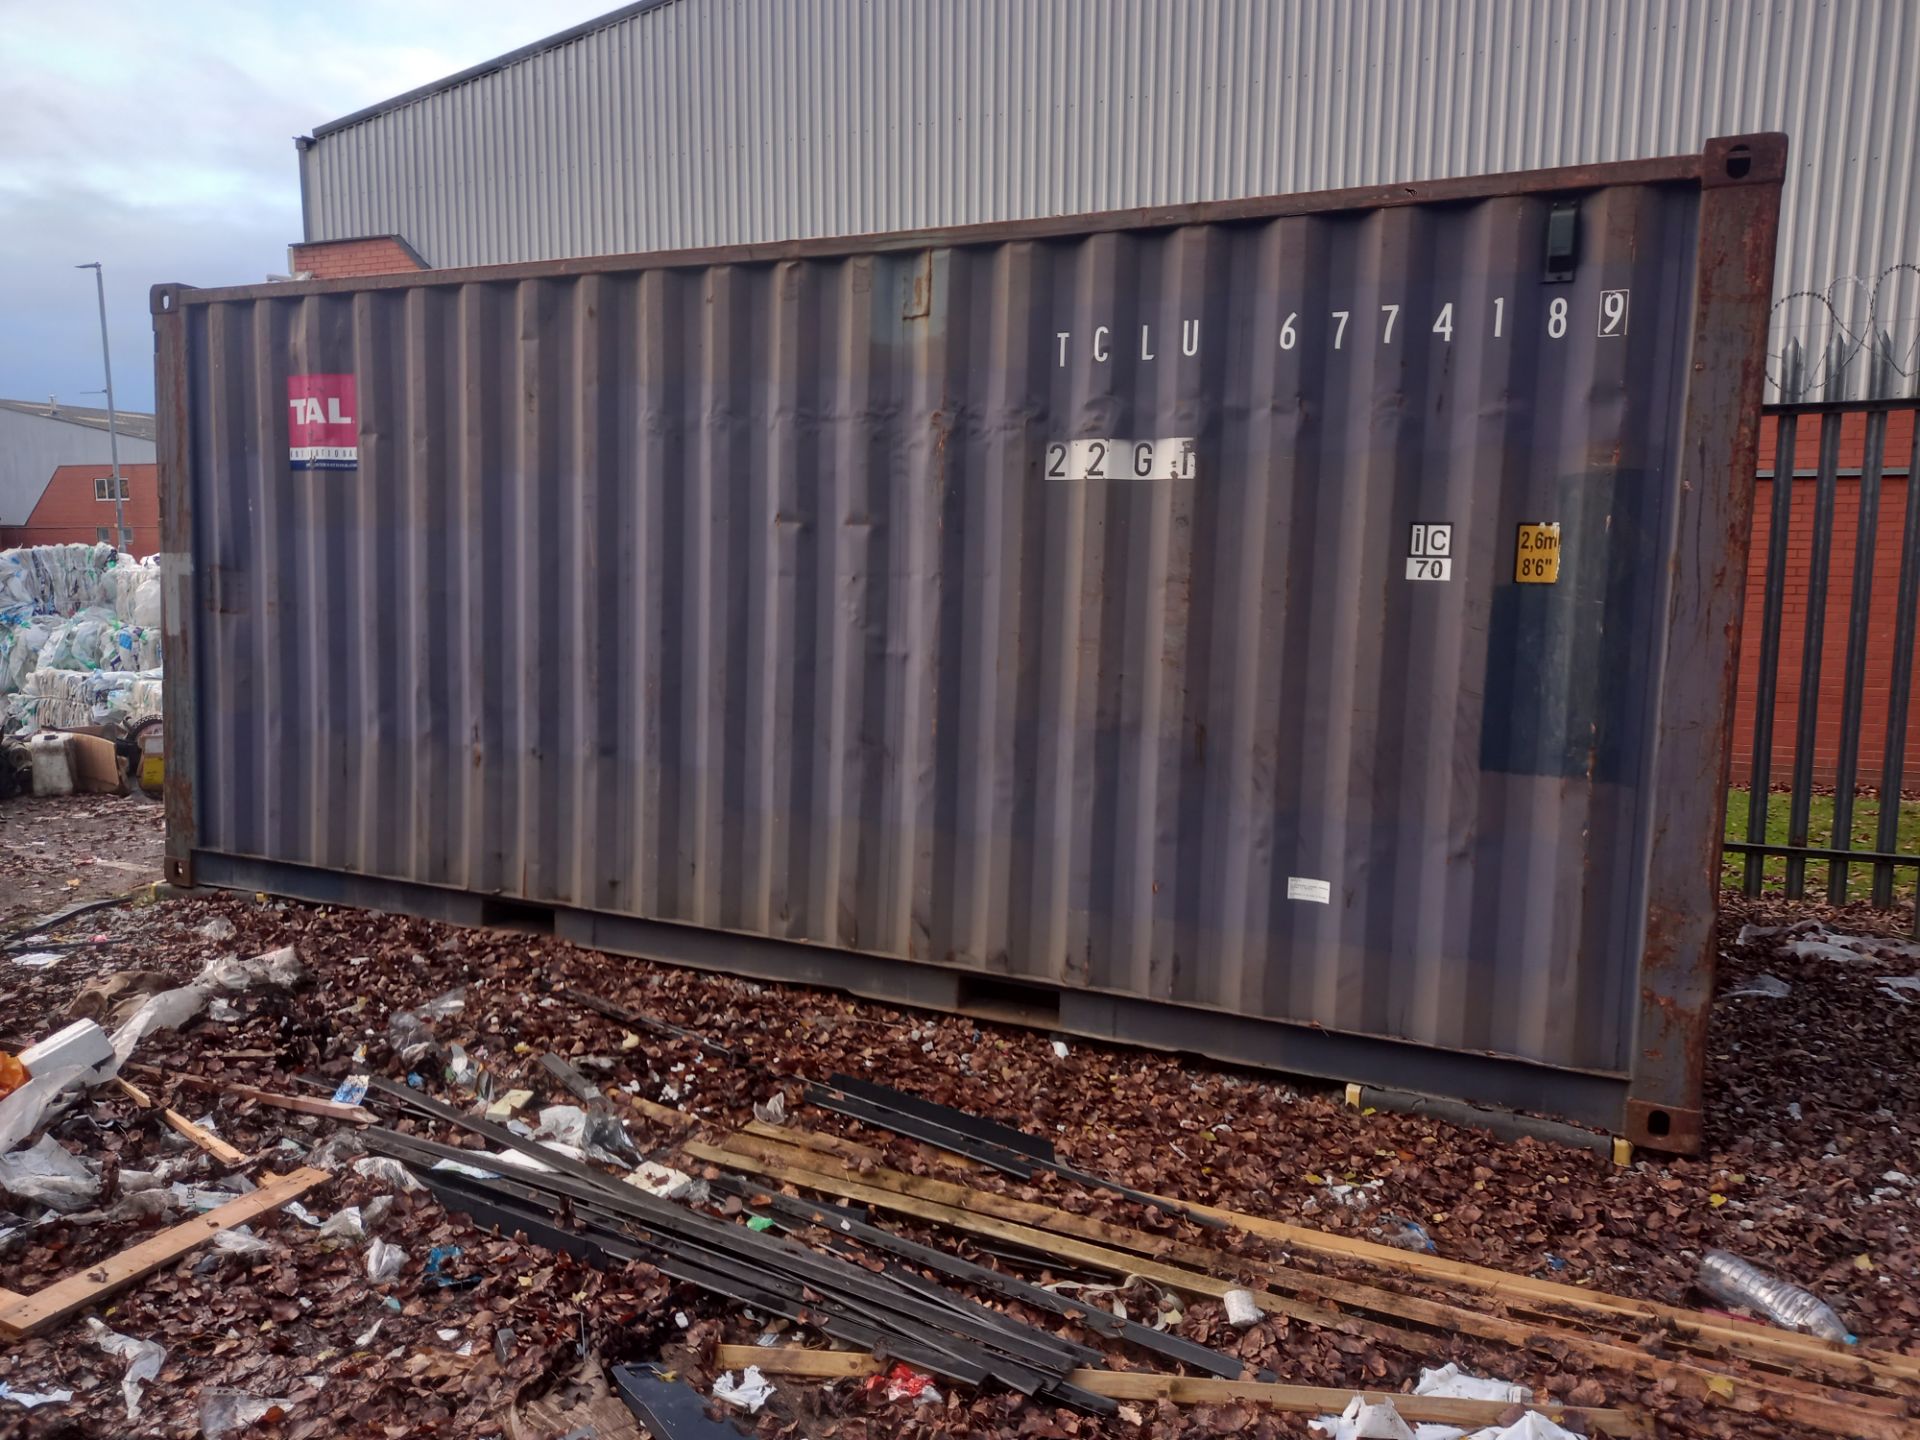 20ft Shipping / storage container, TCLU6774189, in - Image 2 of 8